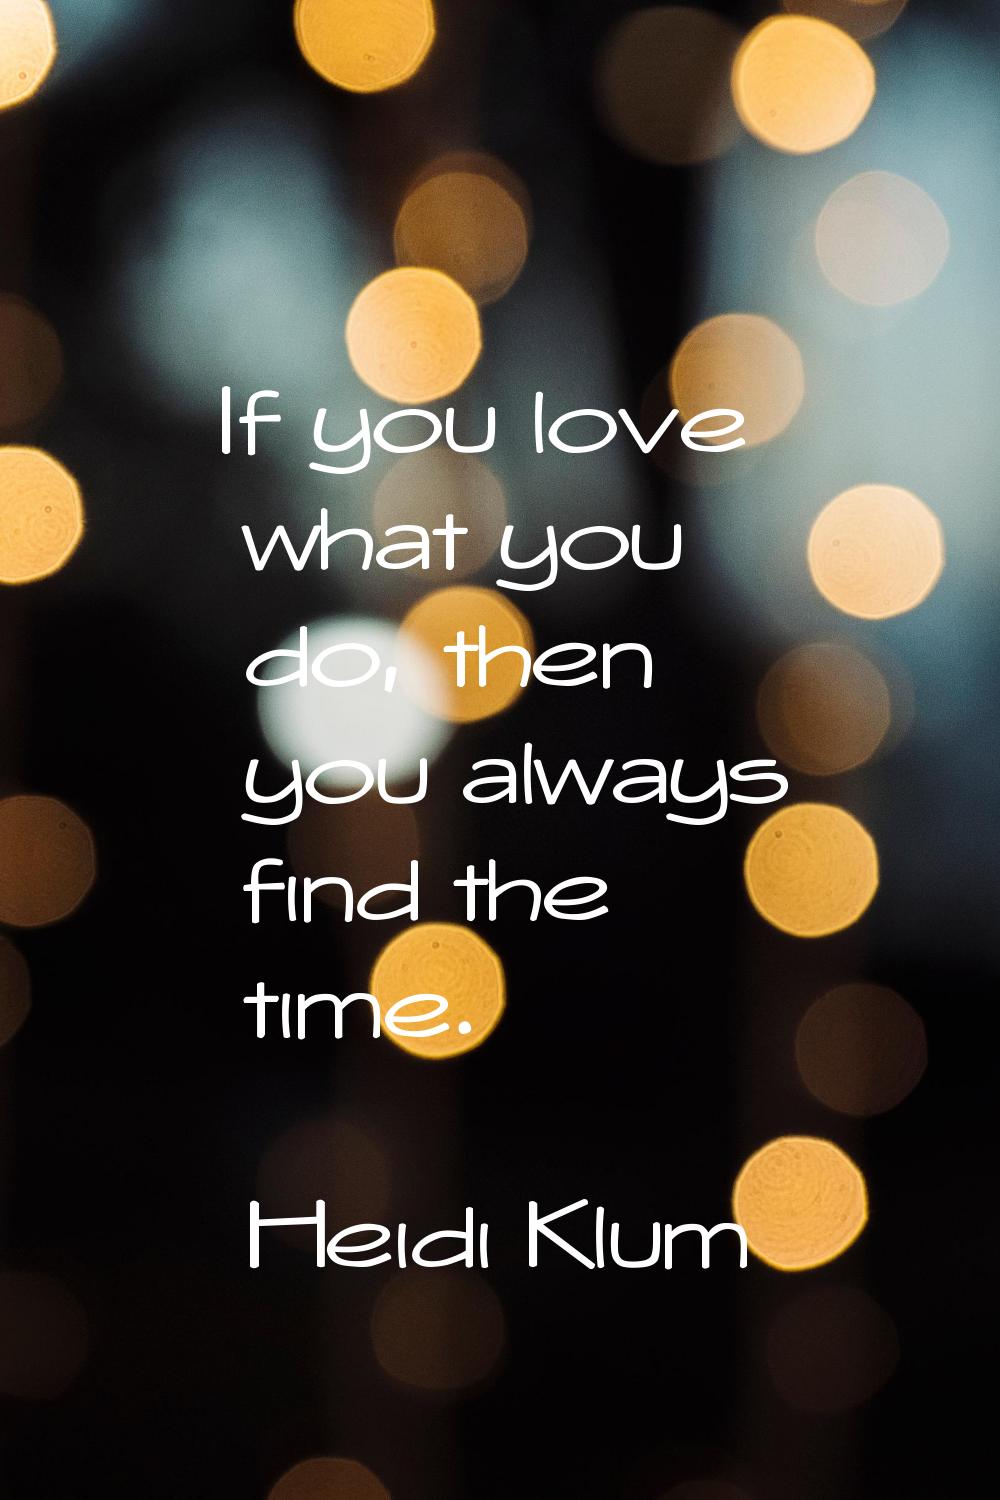 If you love what you do, then you always find the time.